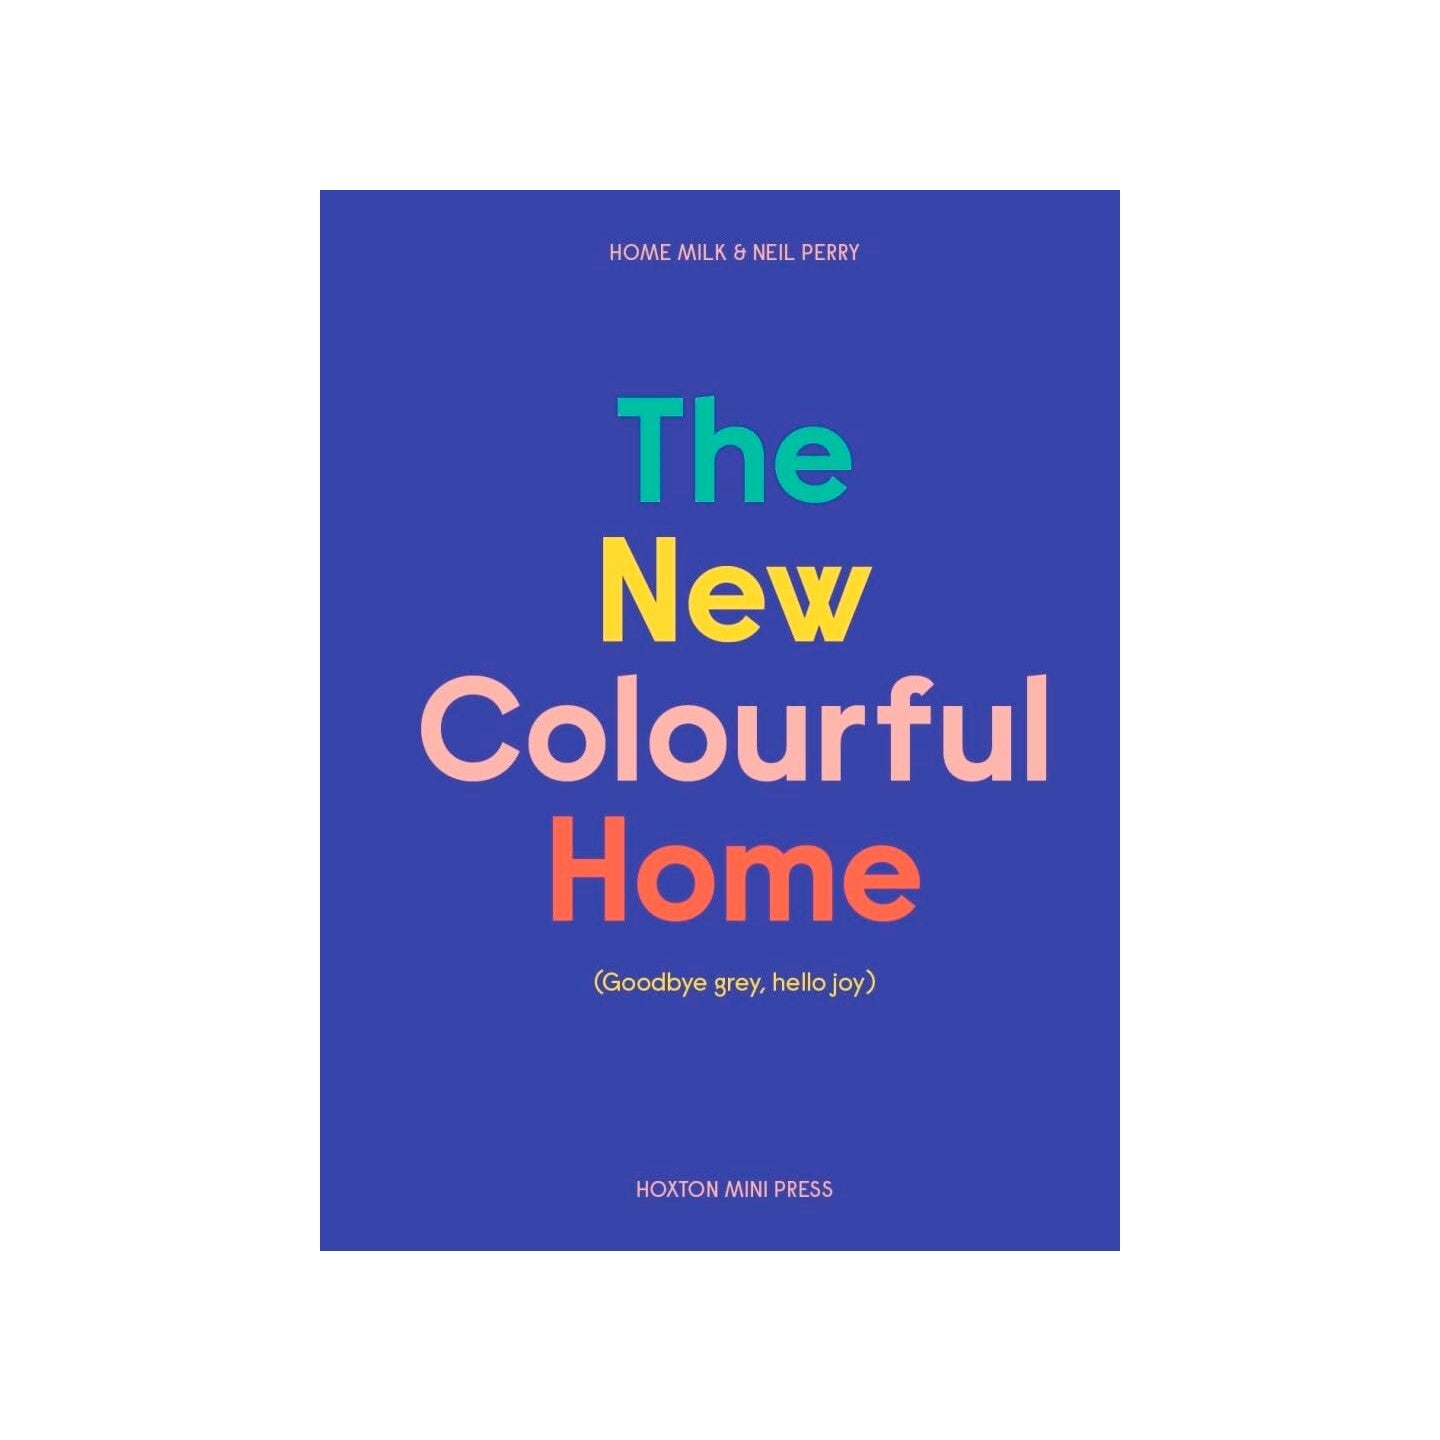 The New Colourful Home